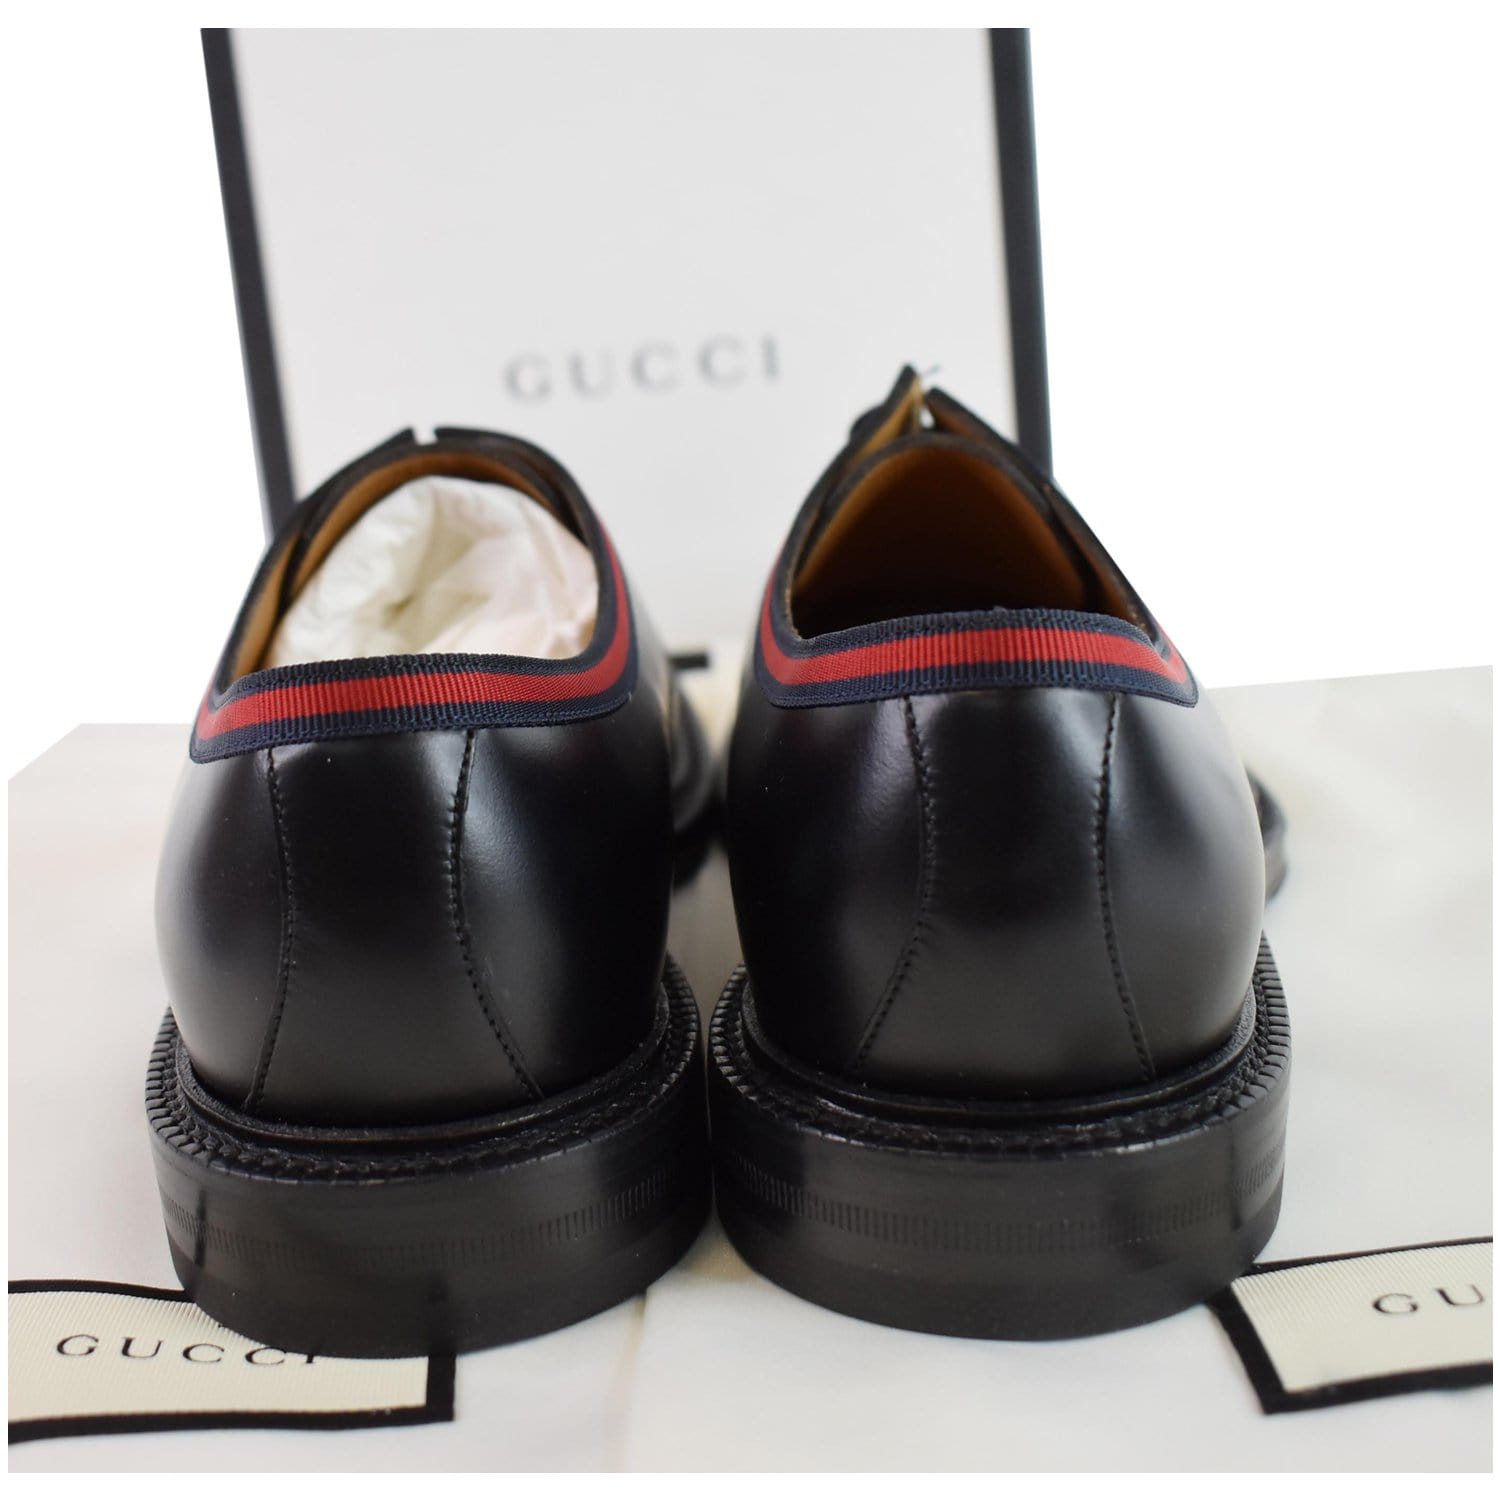 Gucci Classic Web Lace Up Shiny Leather Shoes Black US7